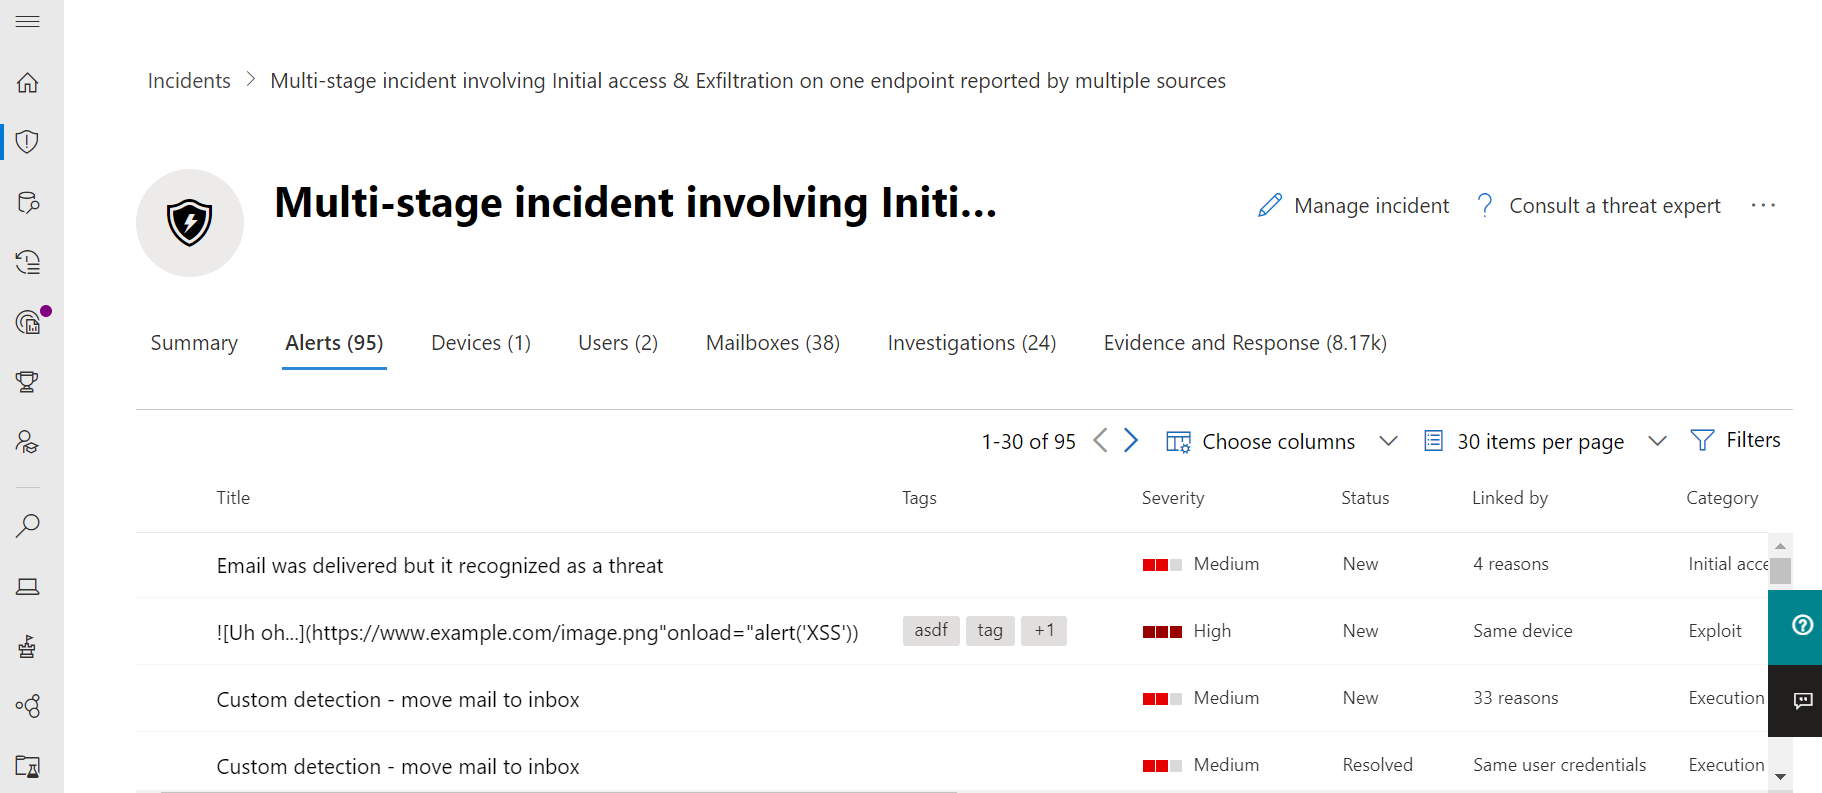 The list of alerts for an incident